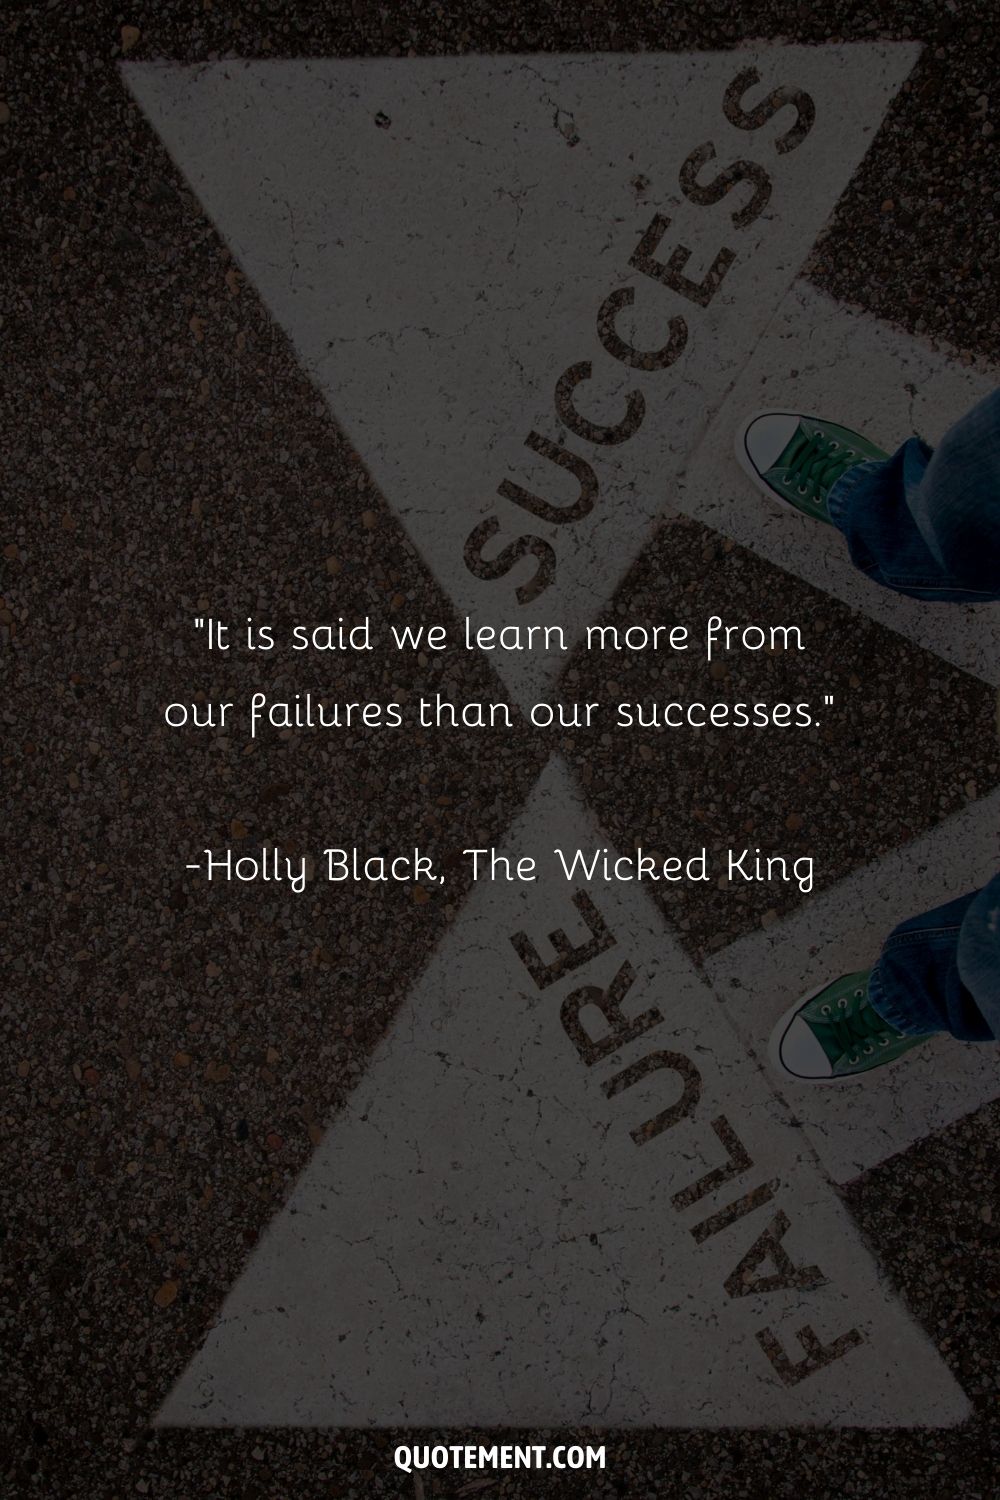 “It is said we learn more from our failures than our successes.” ― Holly Black, The Wicked King